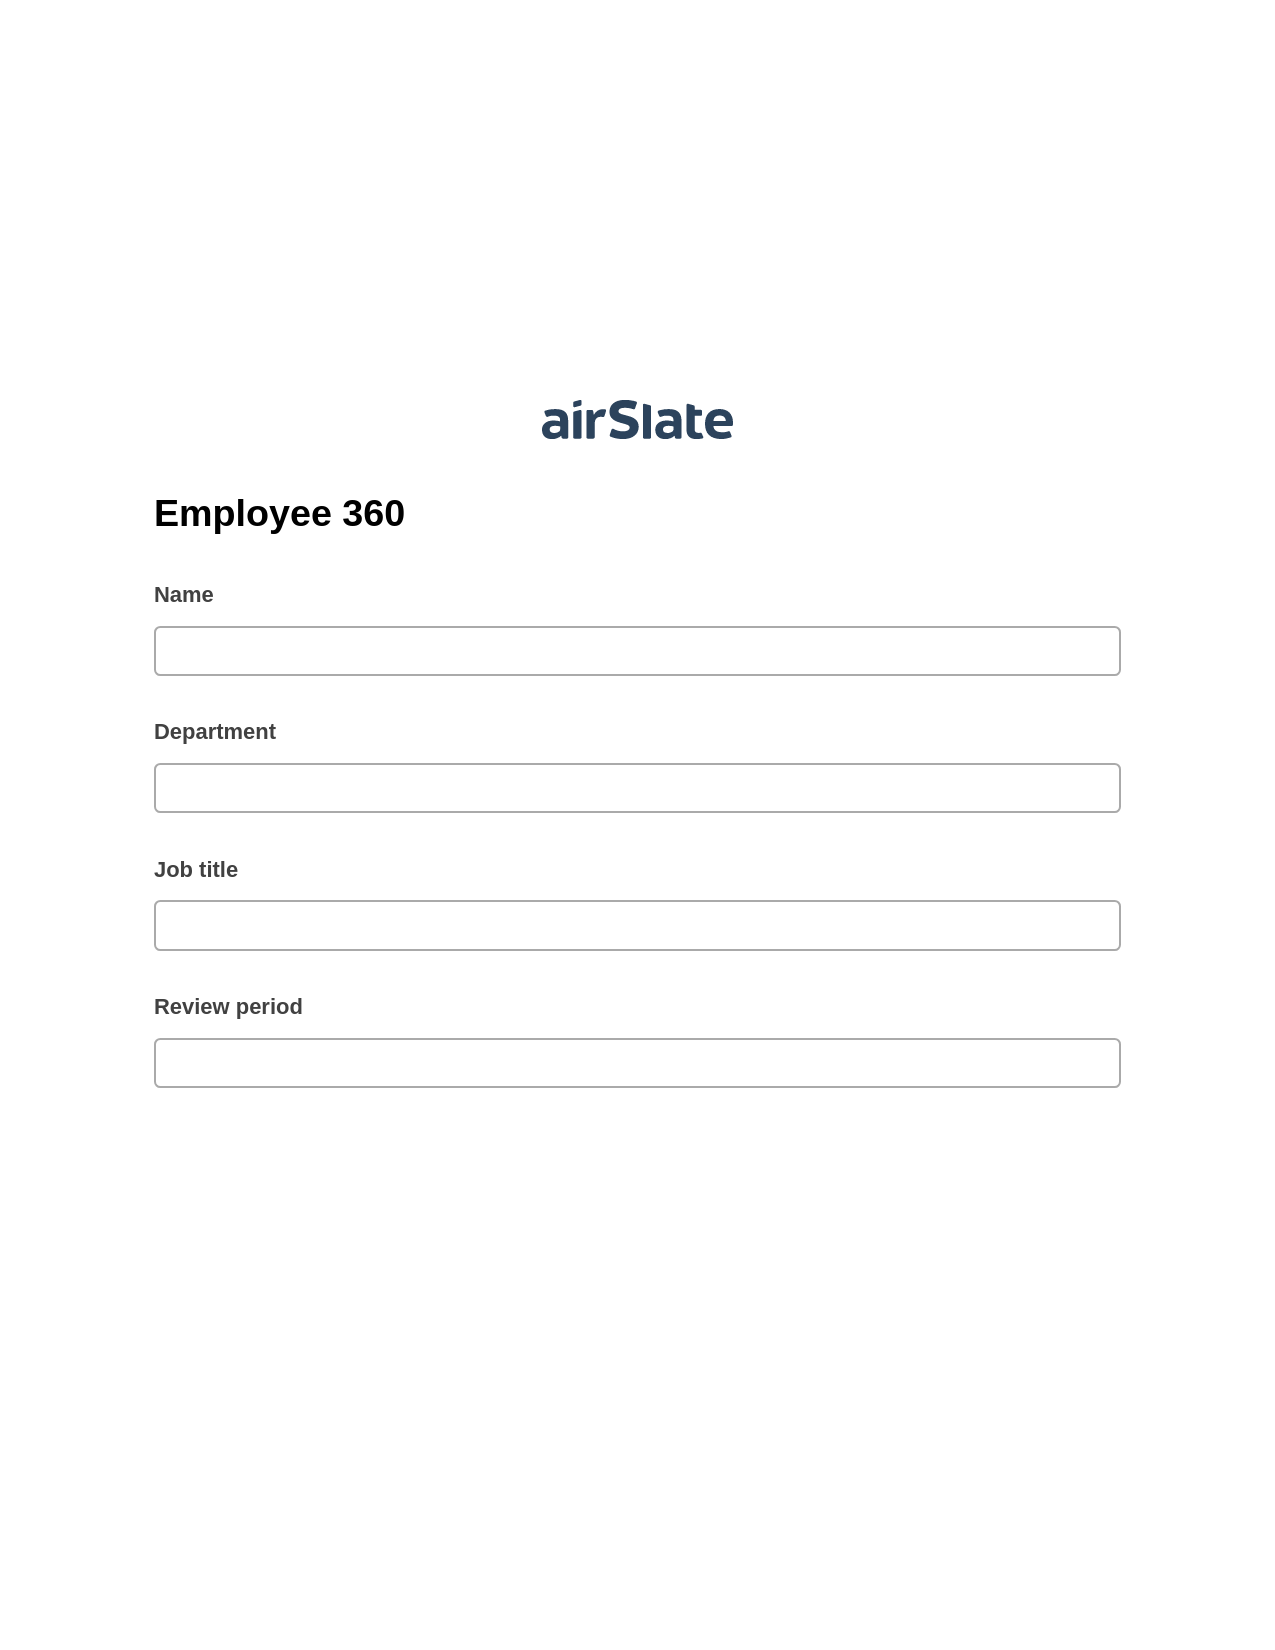 Employee 360 Pre-fill from Salesforce Records with SOQL Bot, Update MS Dynamics 365 Record Bot, Export to WebMerge Bot